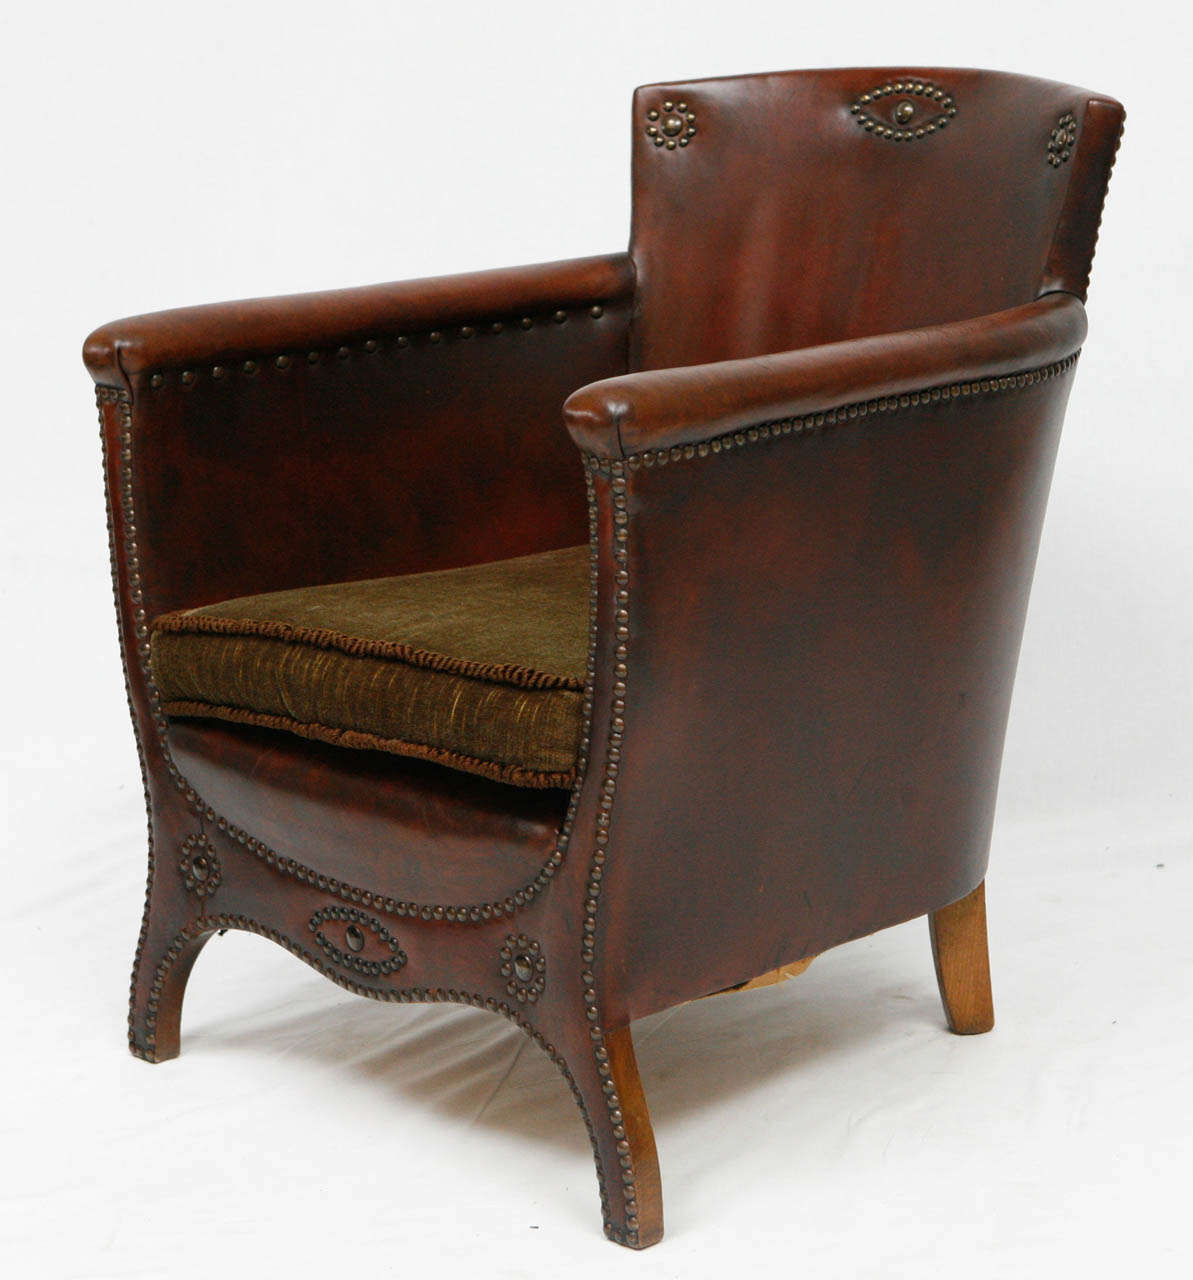 Otto Schulz lounge chair with original leather designed in the 1930's and produced by Boet in Gothenburg.  Store formerly known as ARTFUL DODGER INC